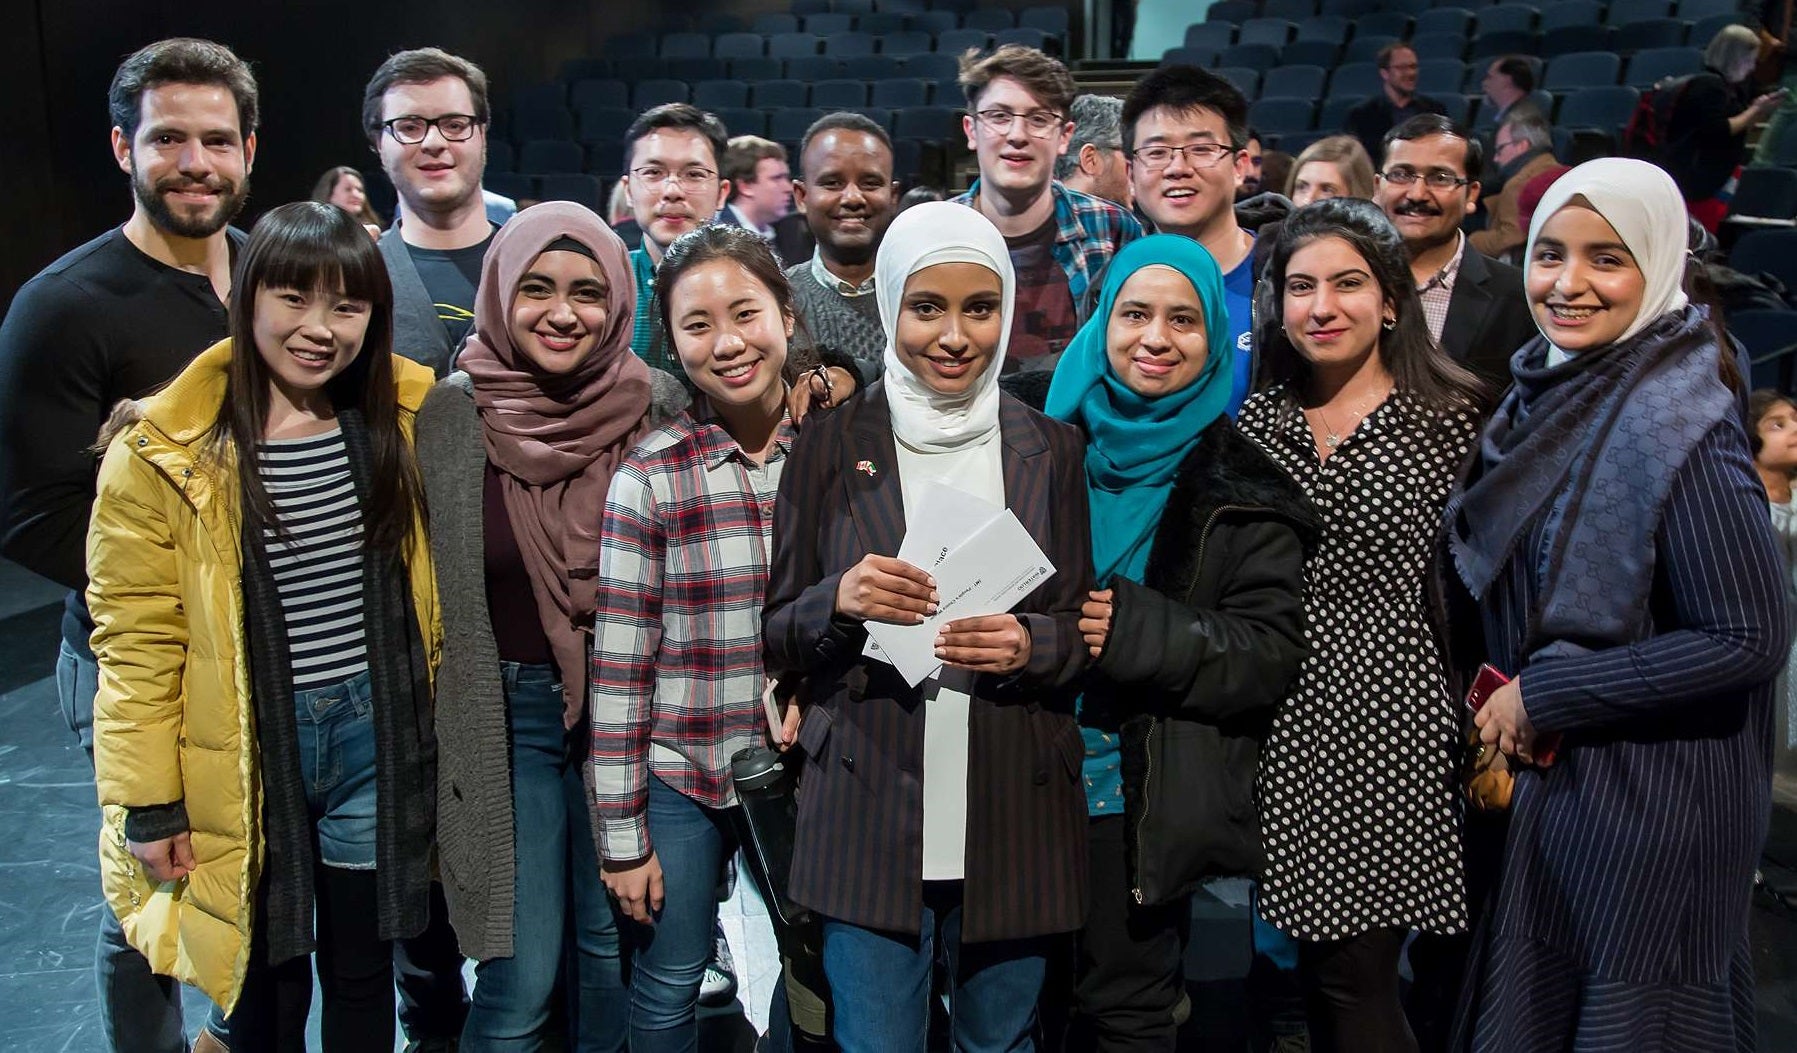 Haya Almutairi poses with supports after winning the 3MT finals at the University of Waterloo.